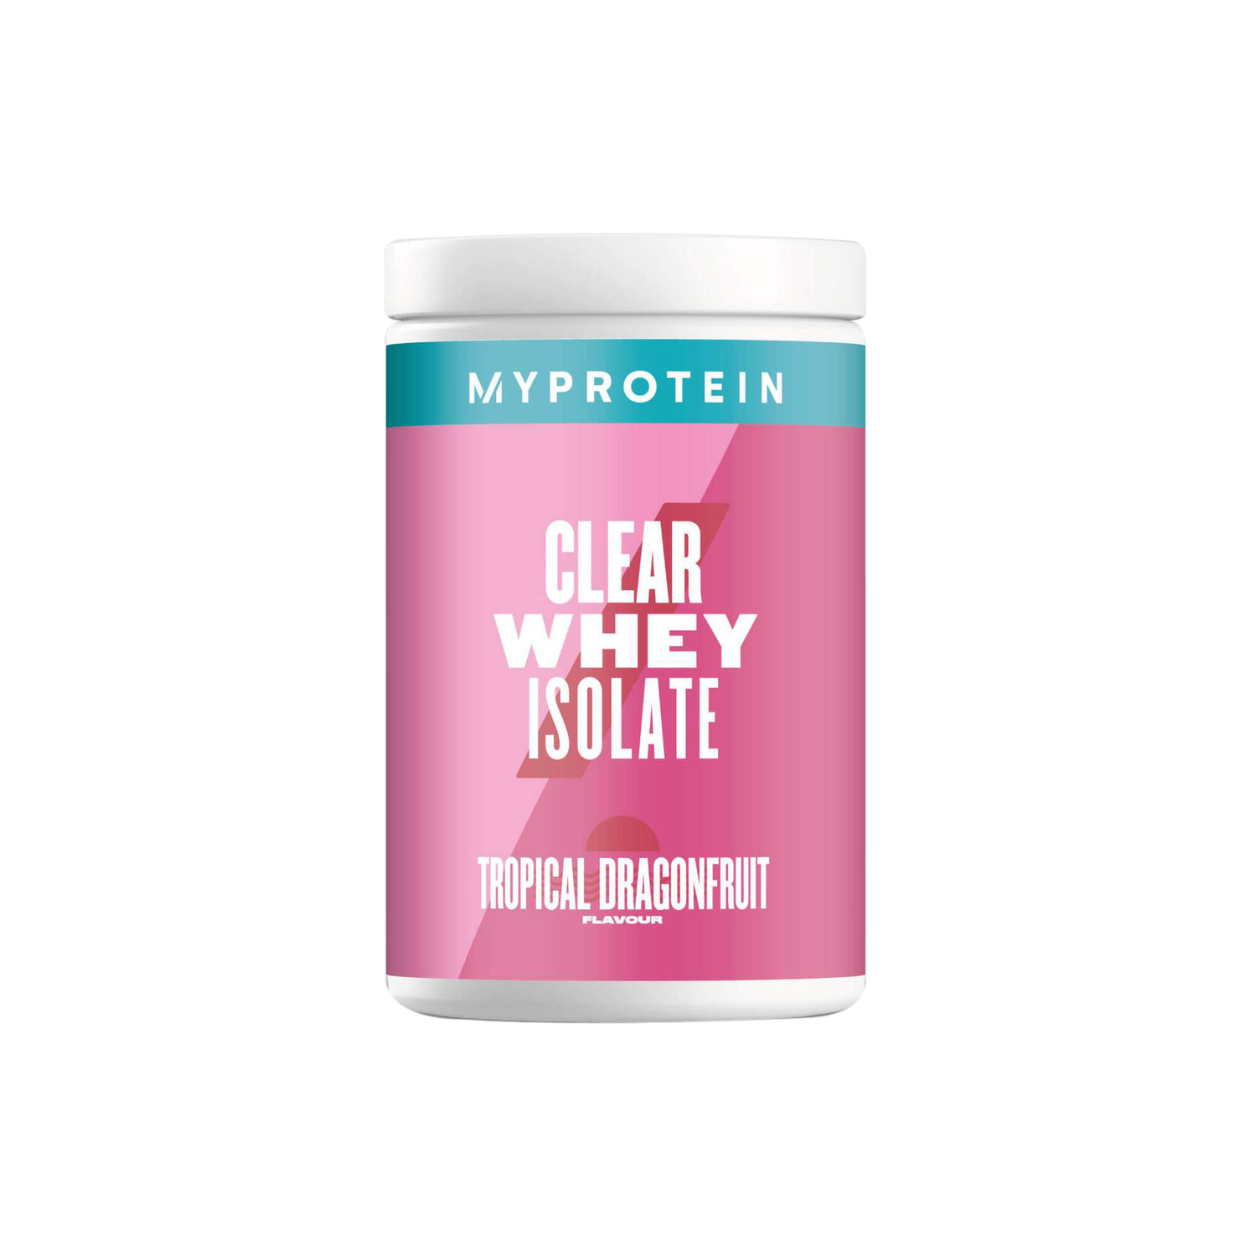 My Protein Clear Whey Isolate Tropical Dragonfruit (502g Dose)